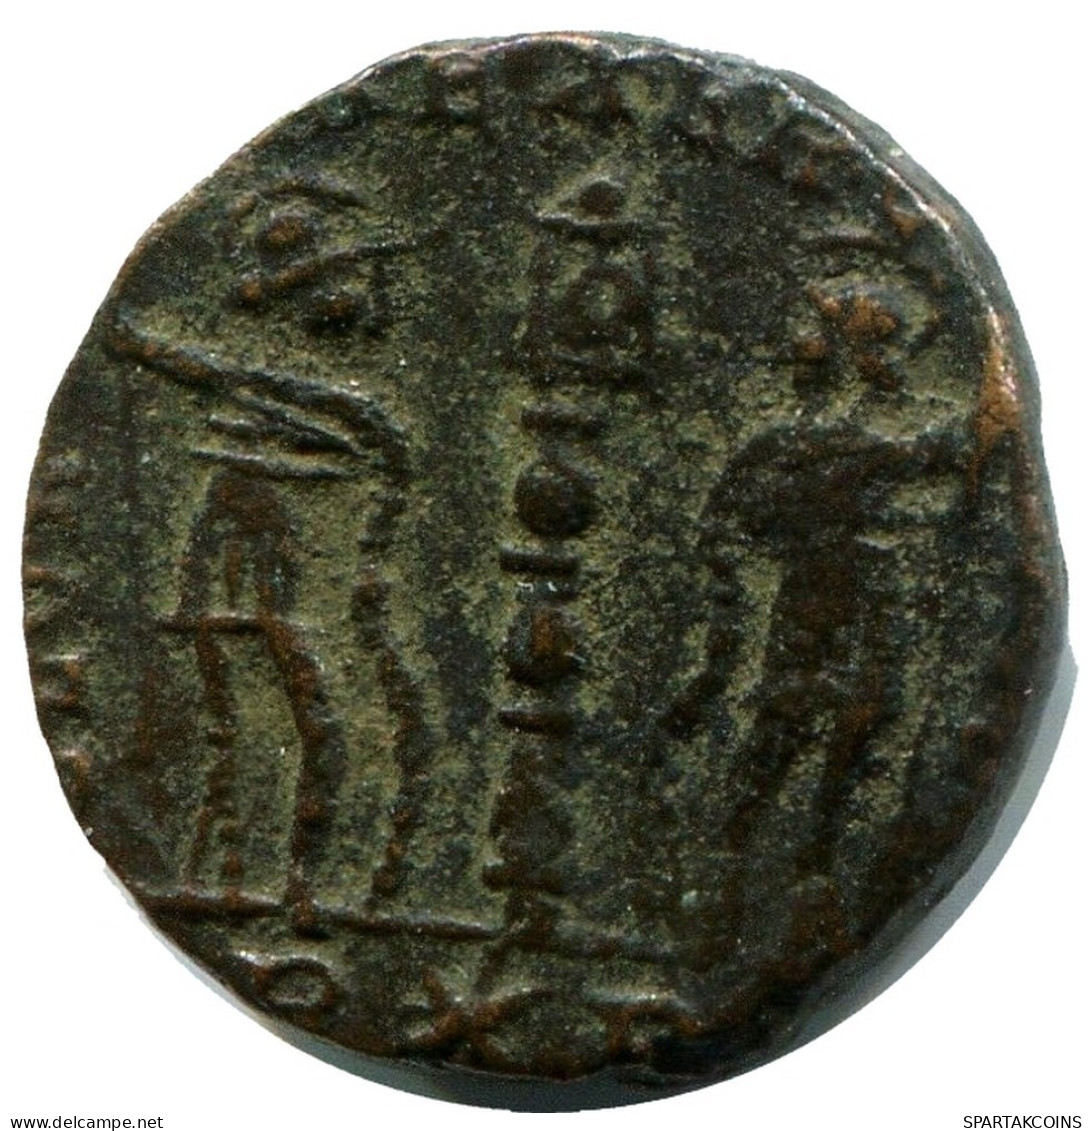 CONSTANTINE I MINTED IN ROME ITALY FOUND IN IHNASYAH HOARD EGYPT #ANC11143.14.U.A - L'Empire Chrétien (307 à 363)